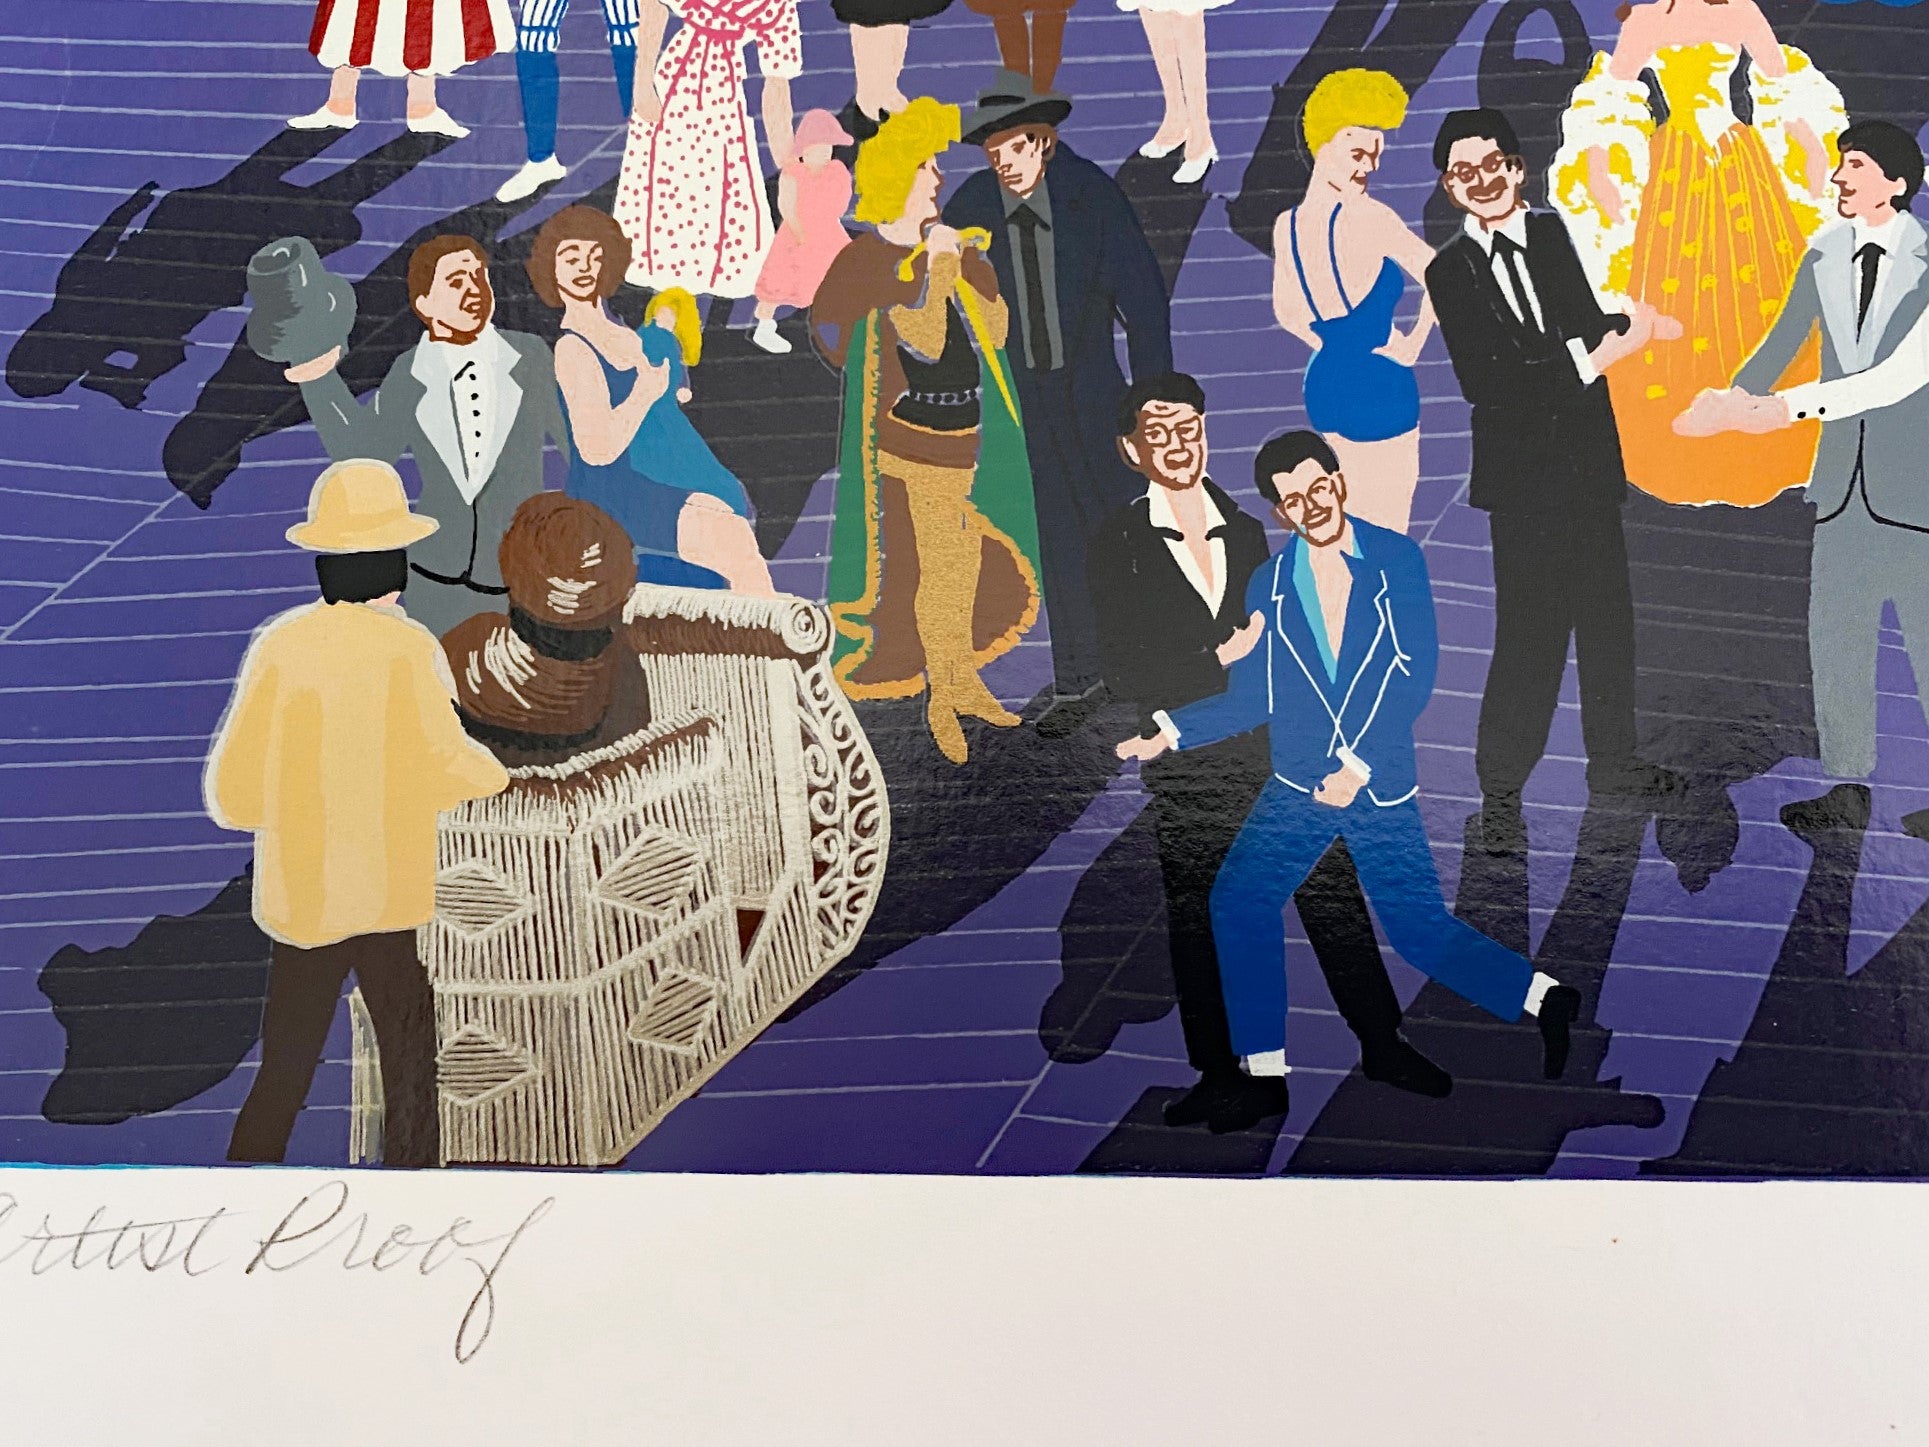 Boardwalk of Atlantic City - Limited Edition Artist Proof Serigraph Print on Paper by Melanie Taylor Kent